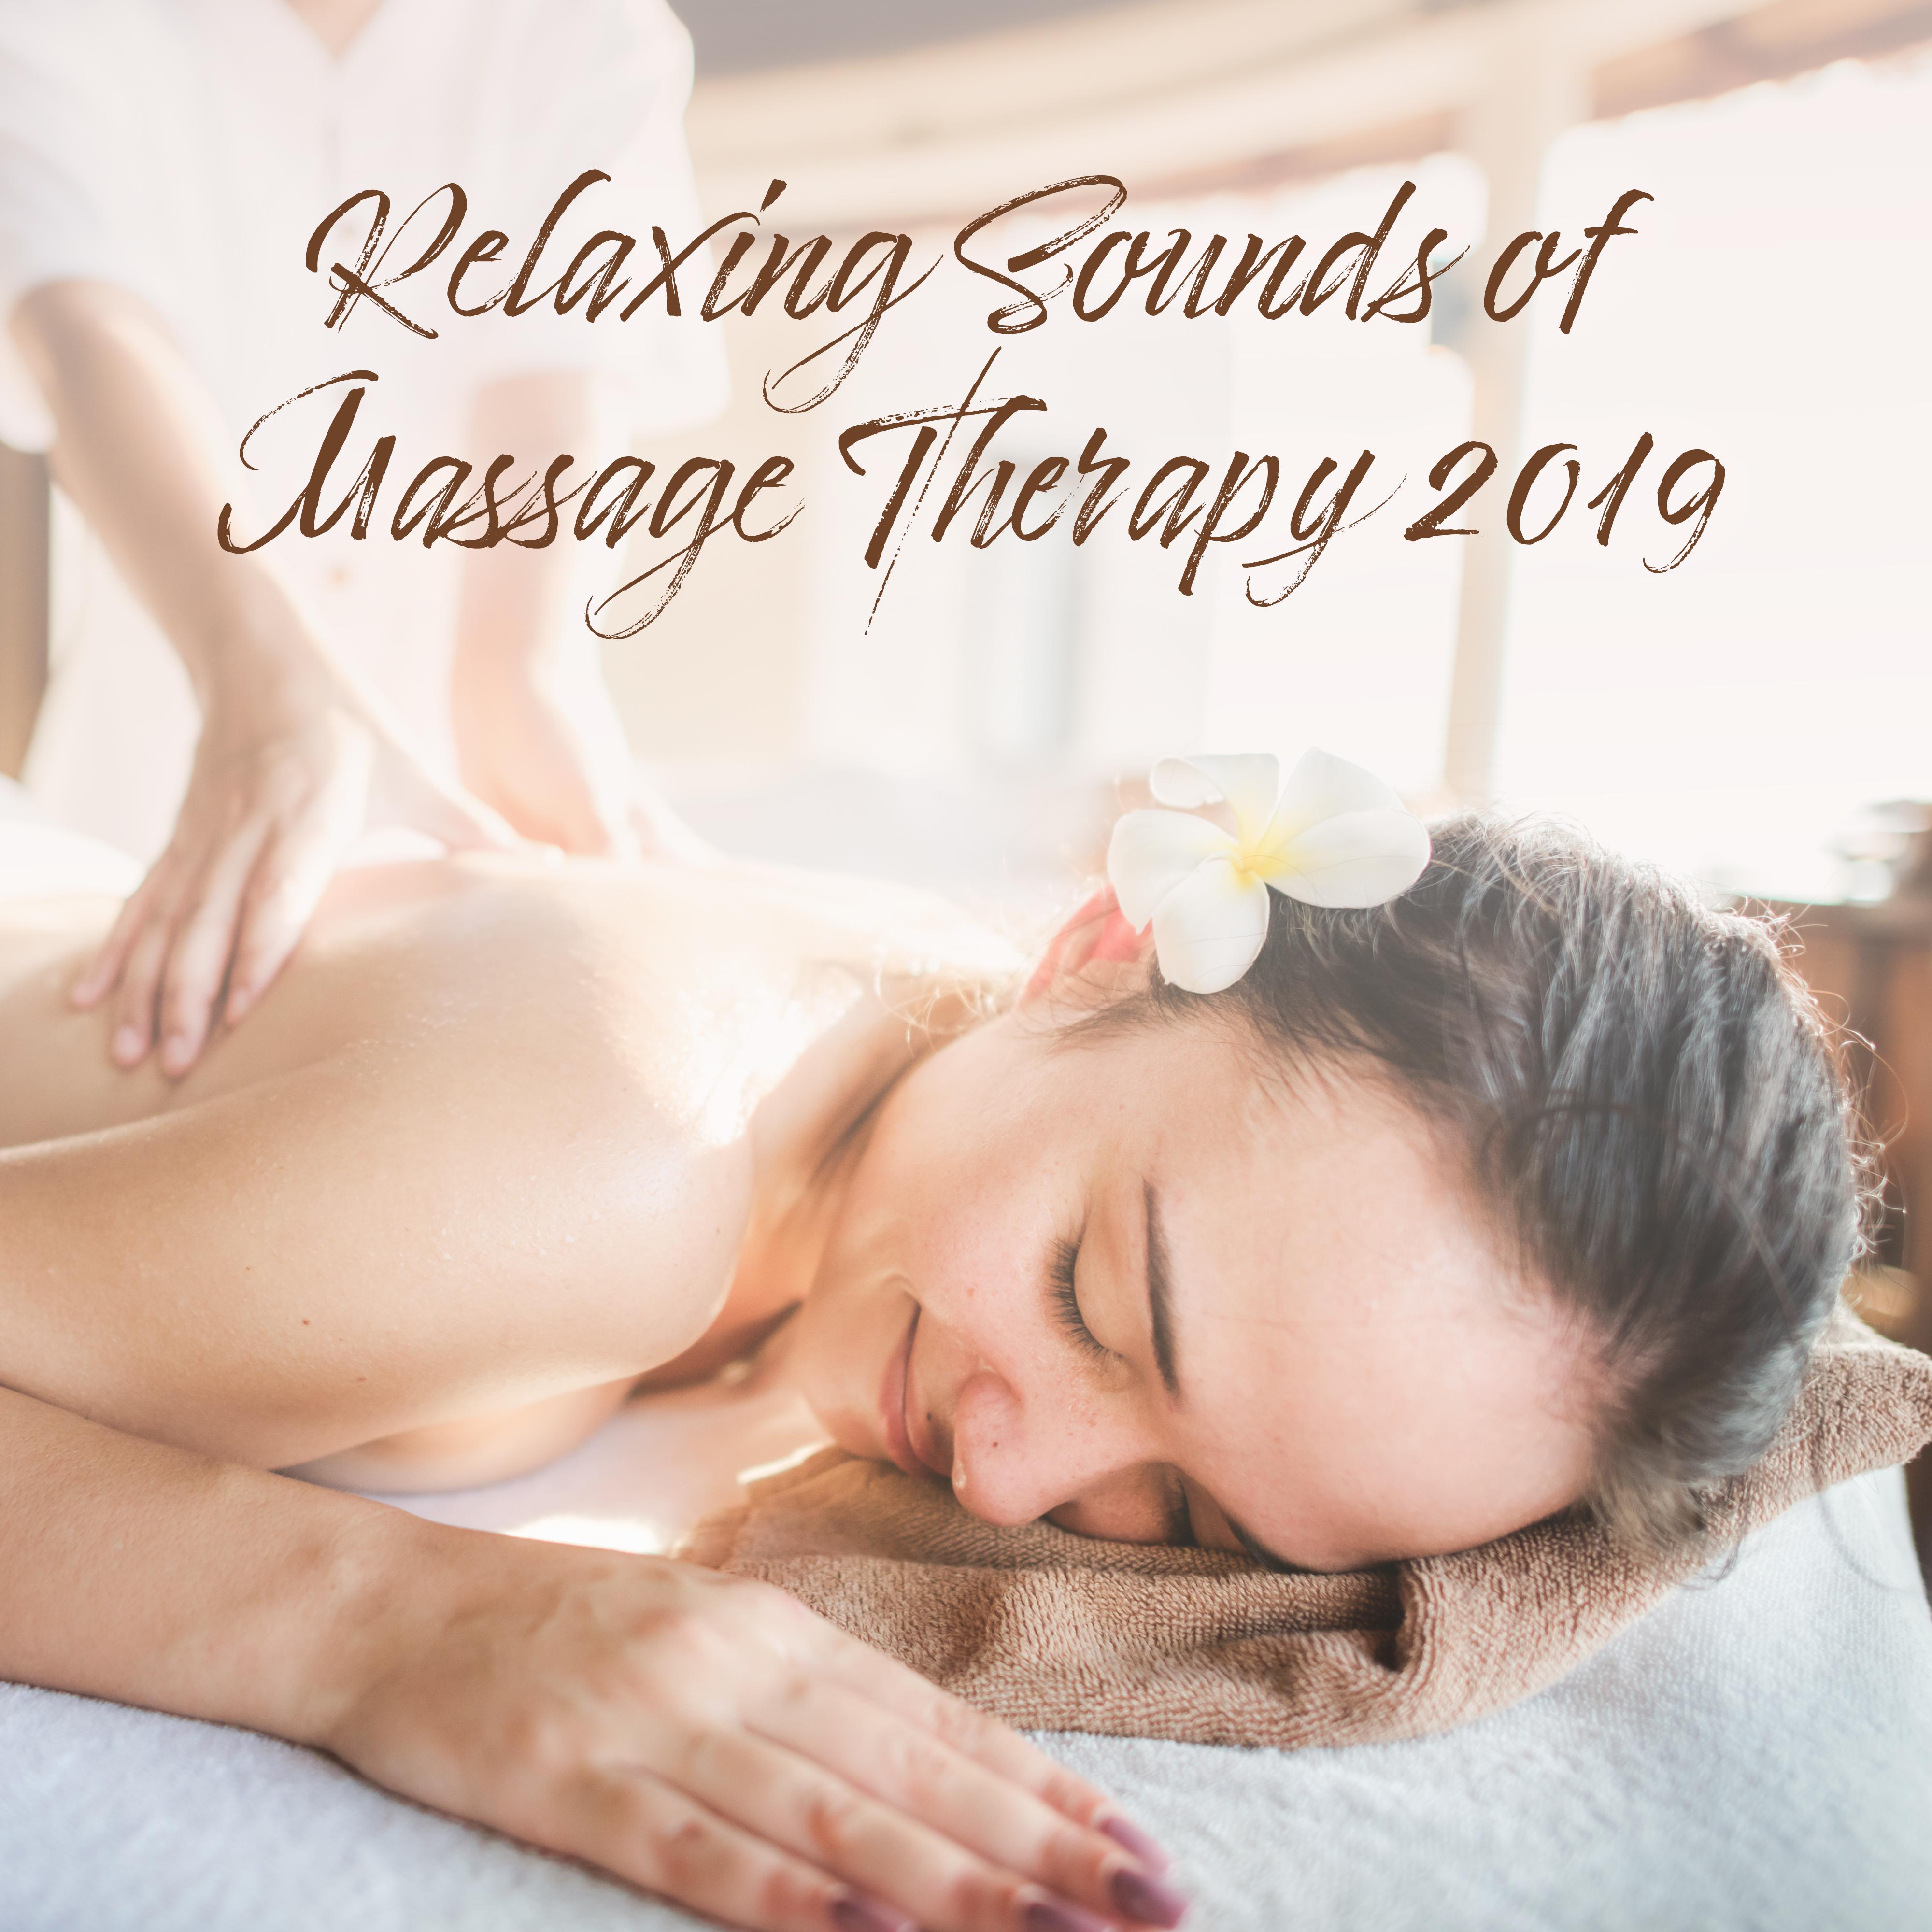 Relaxing Sounds of Massage Therapy 2019